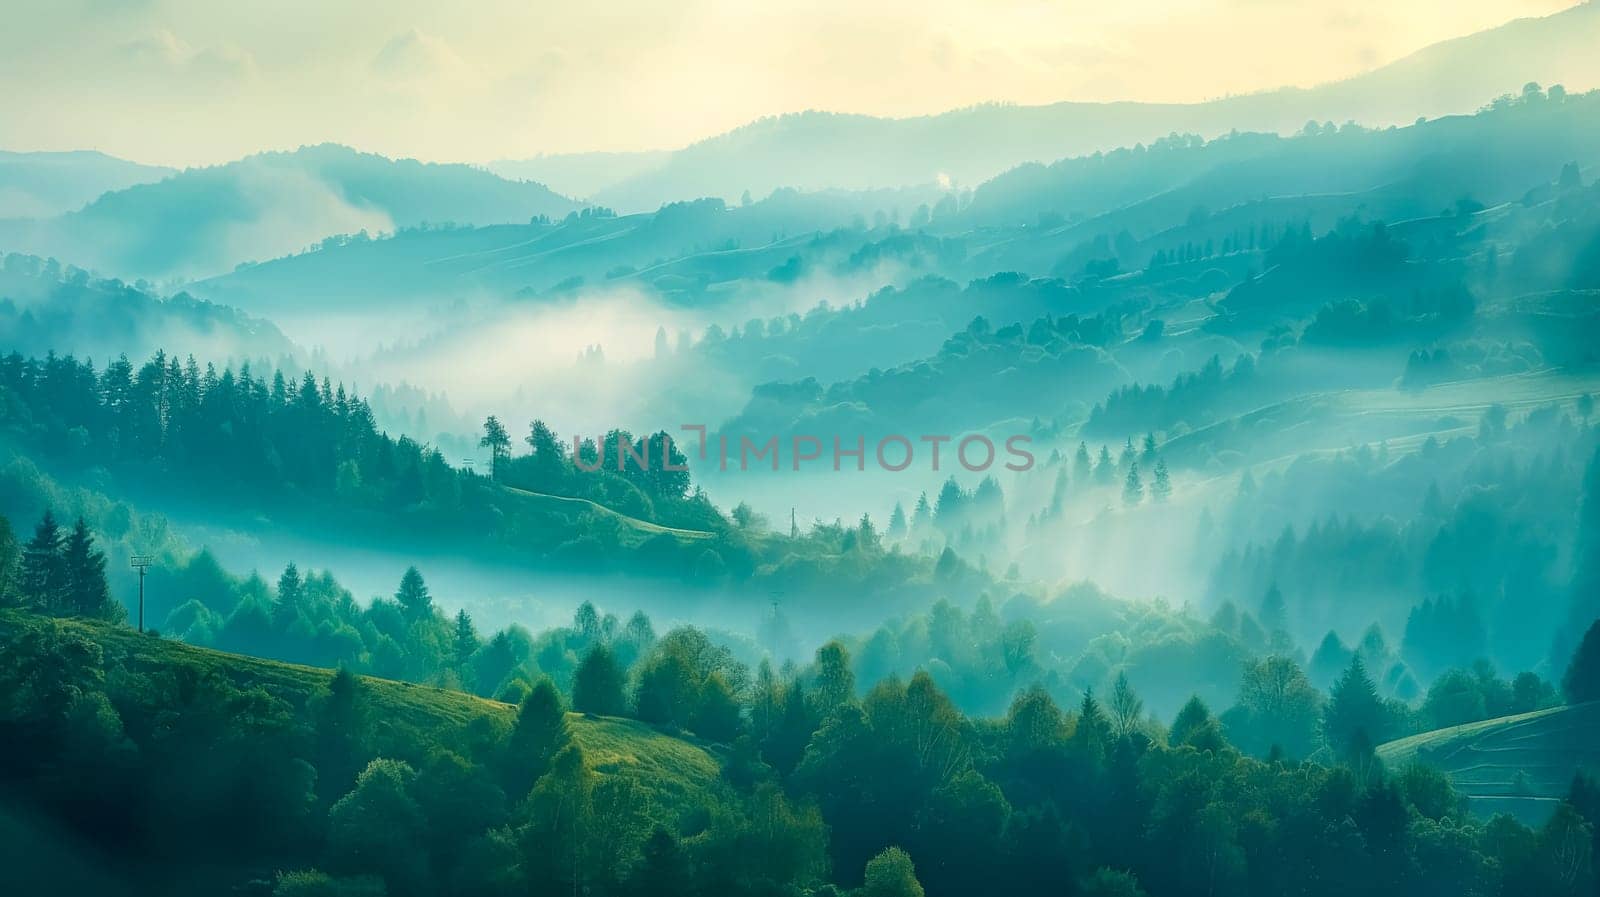 Layers of hills shrouded in morning mist with a forested landscape by Edophoto